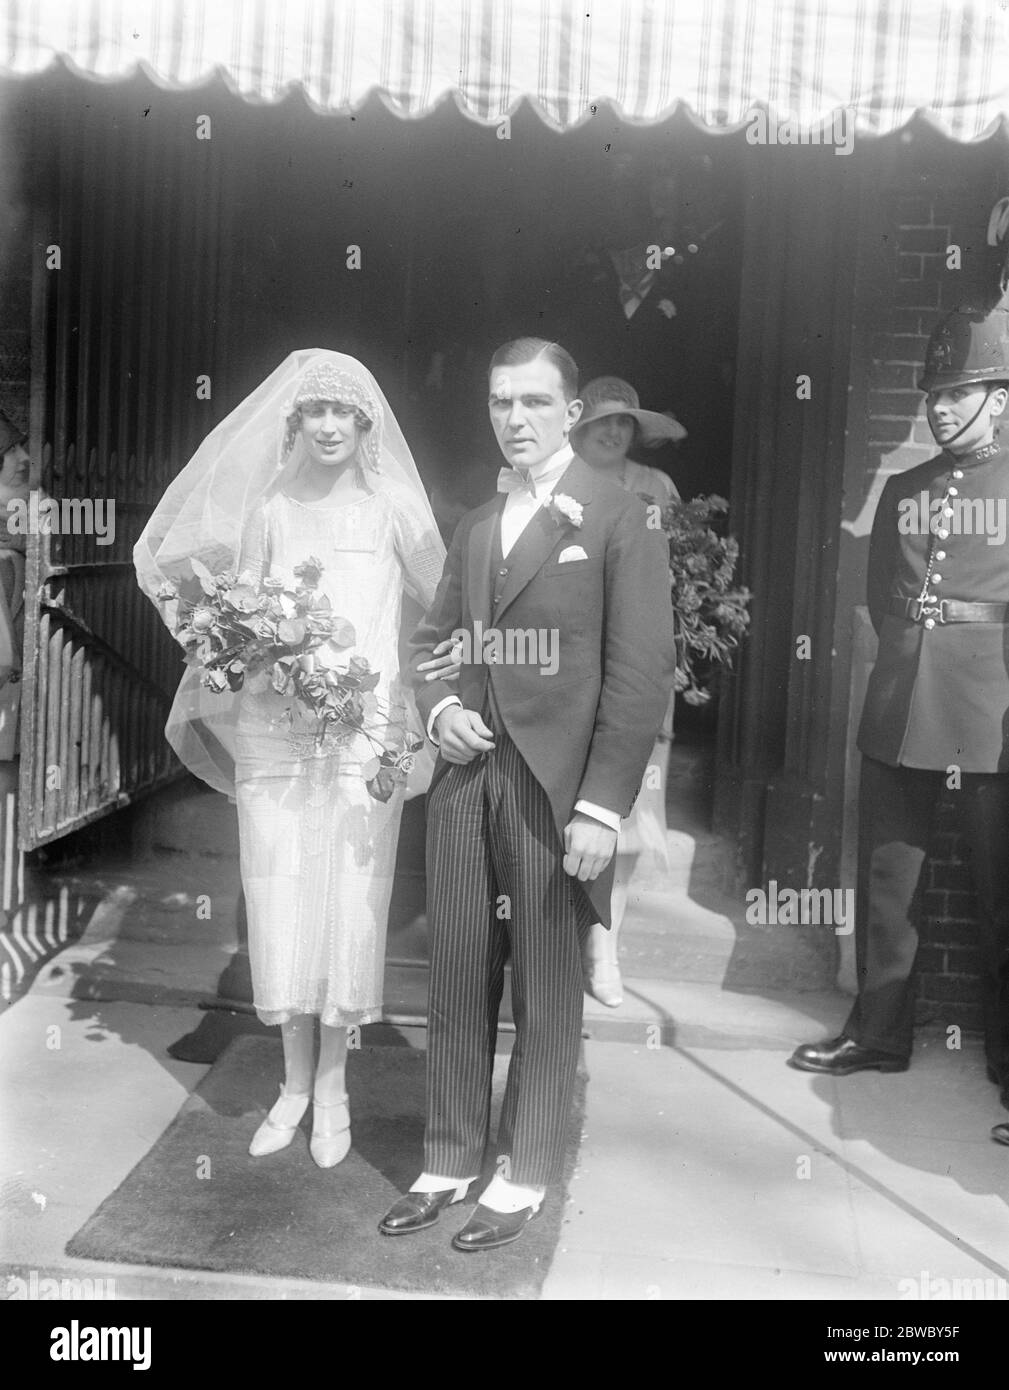 Well known rugby player weds . Mr Peter W Adams , the well known Harlequin forward , was married to Miss F G Wright at Brompton Parish Church . 22 April 1925 Stock Photo